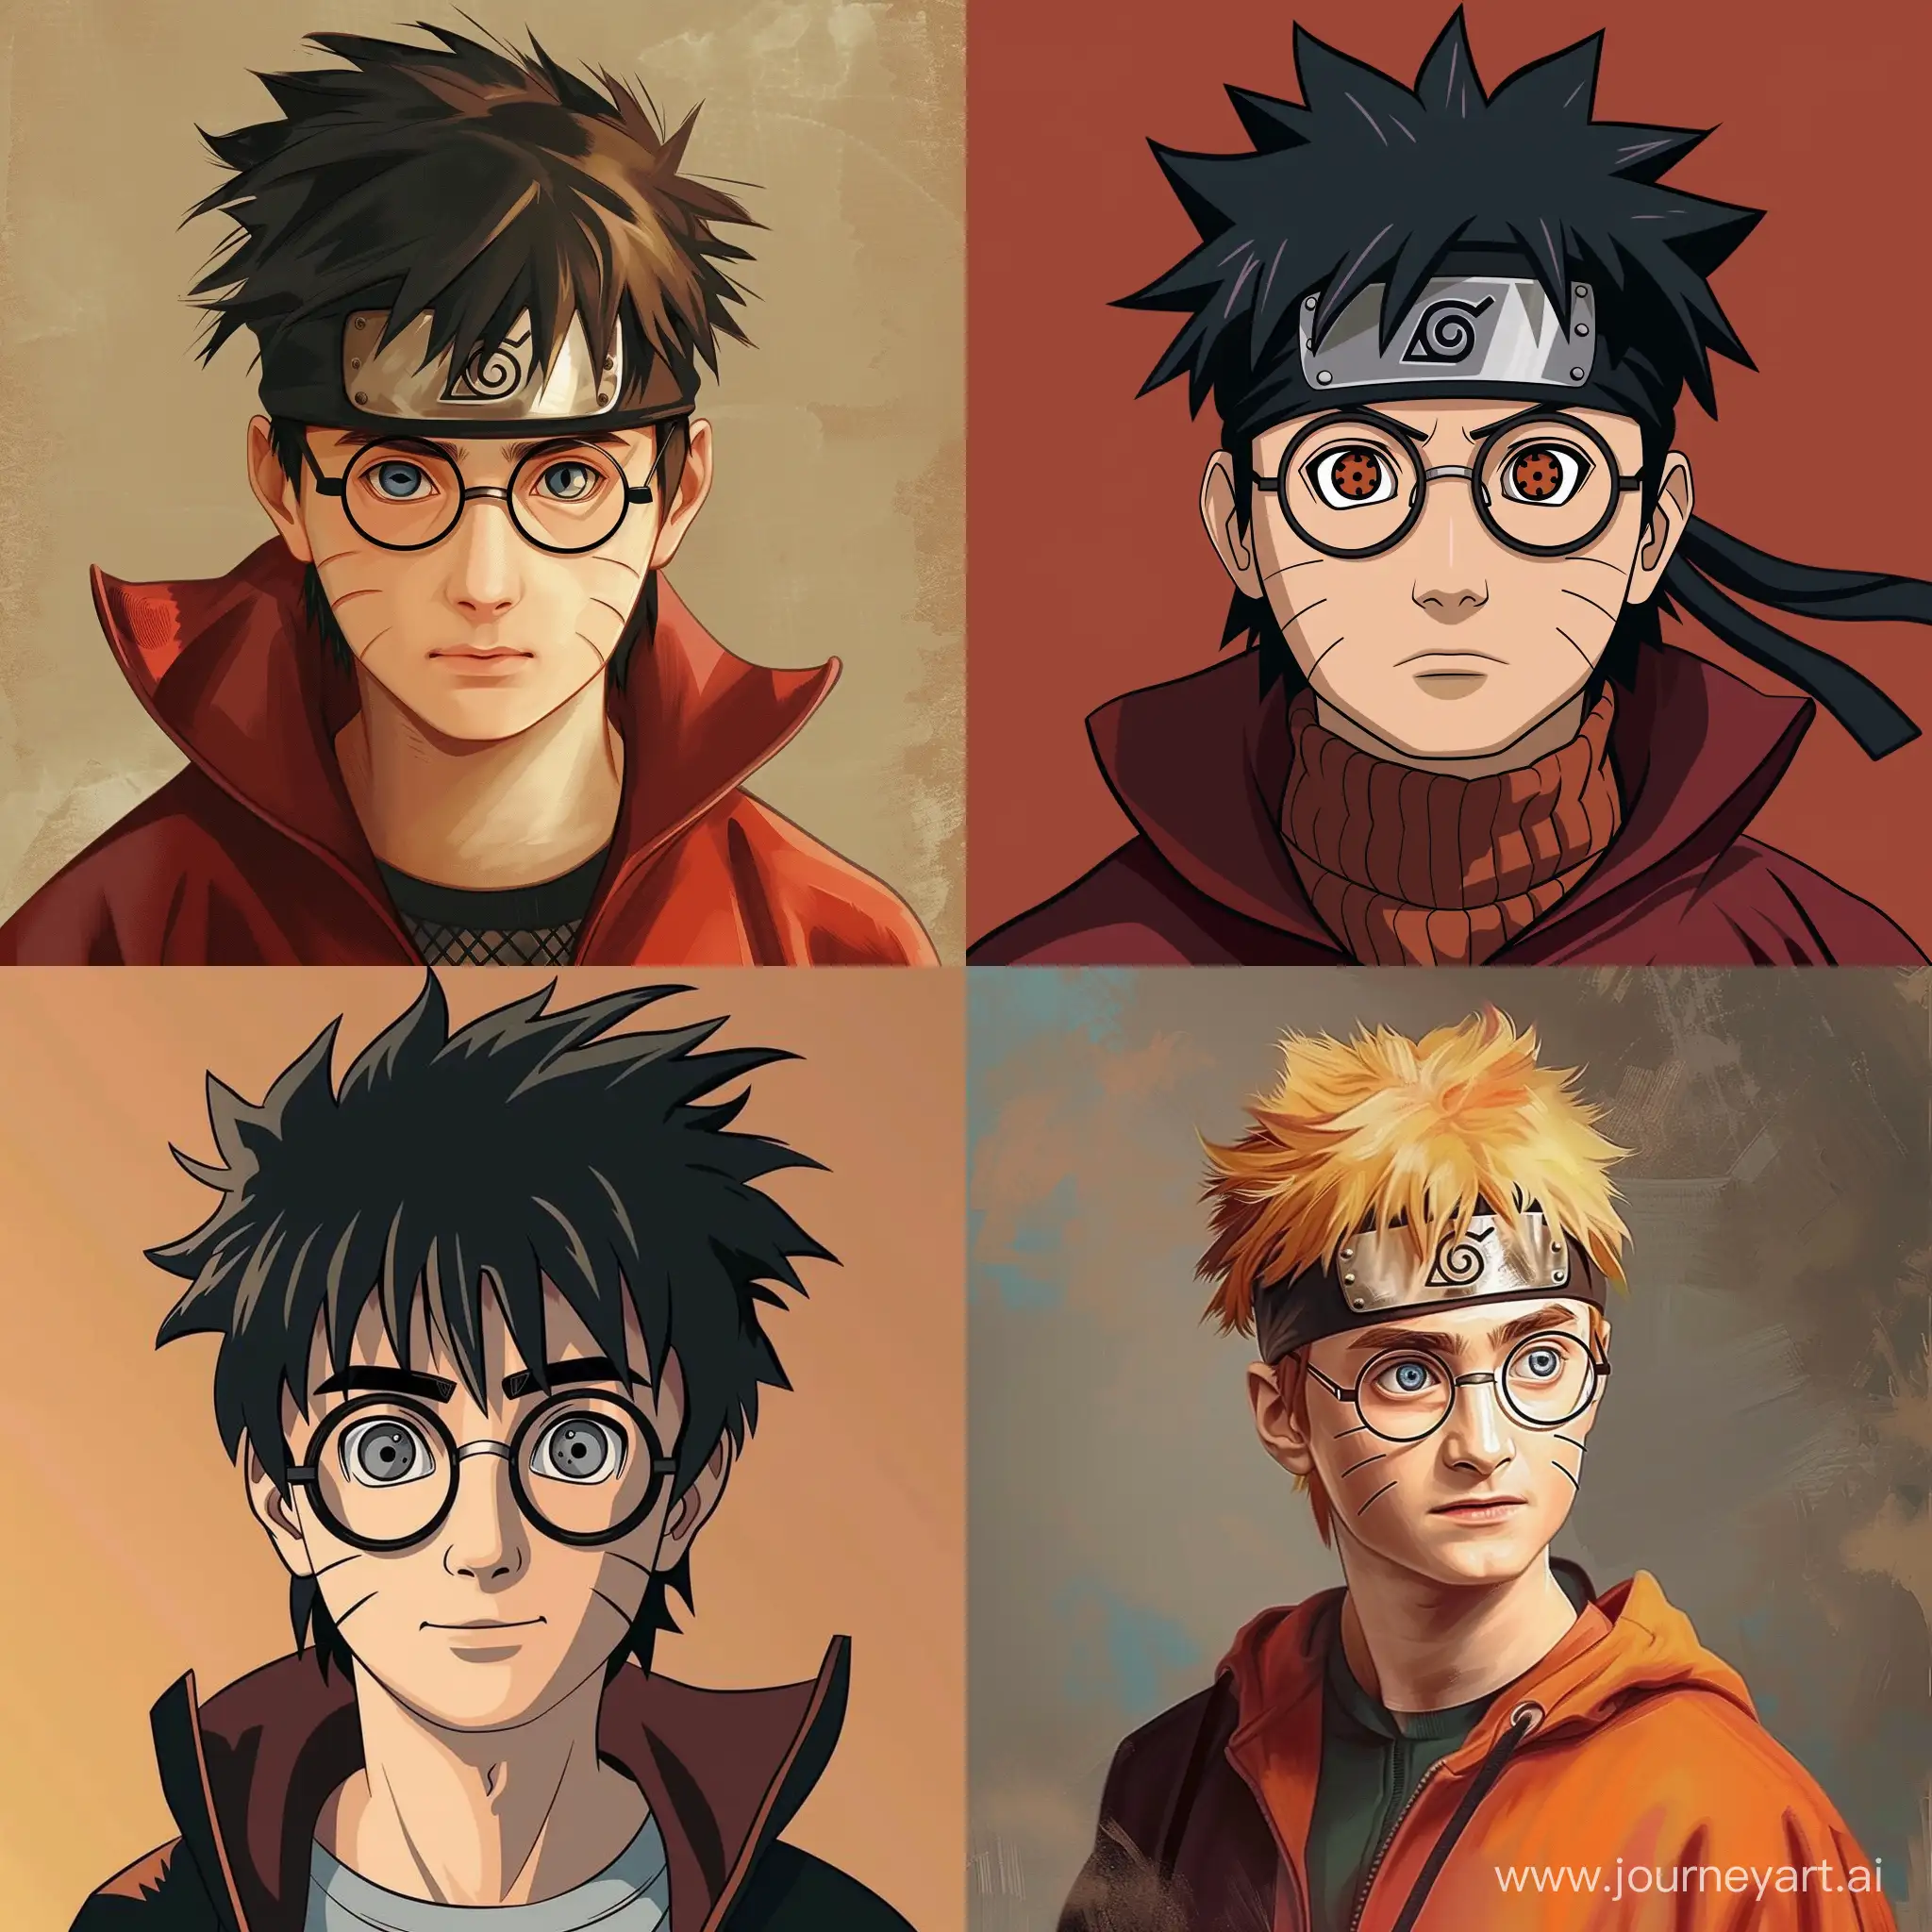 Draw Harry Potter in Naruto anime style